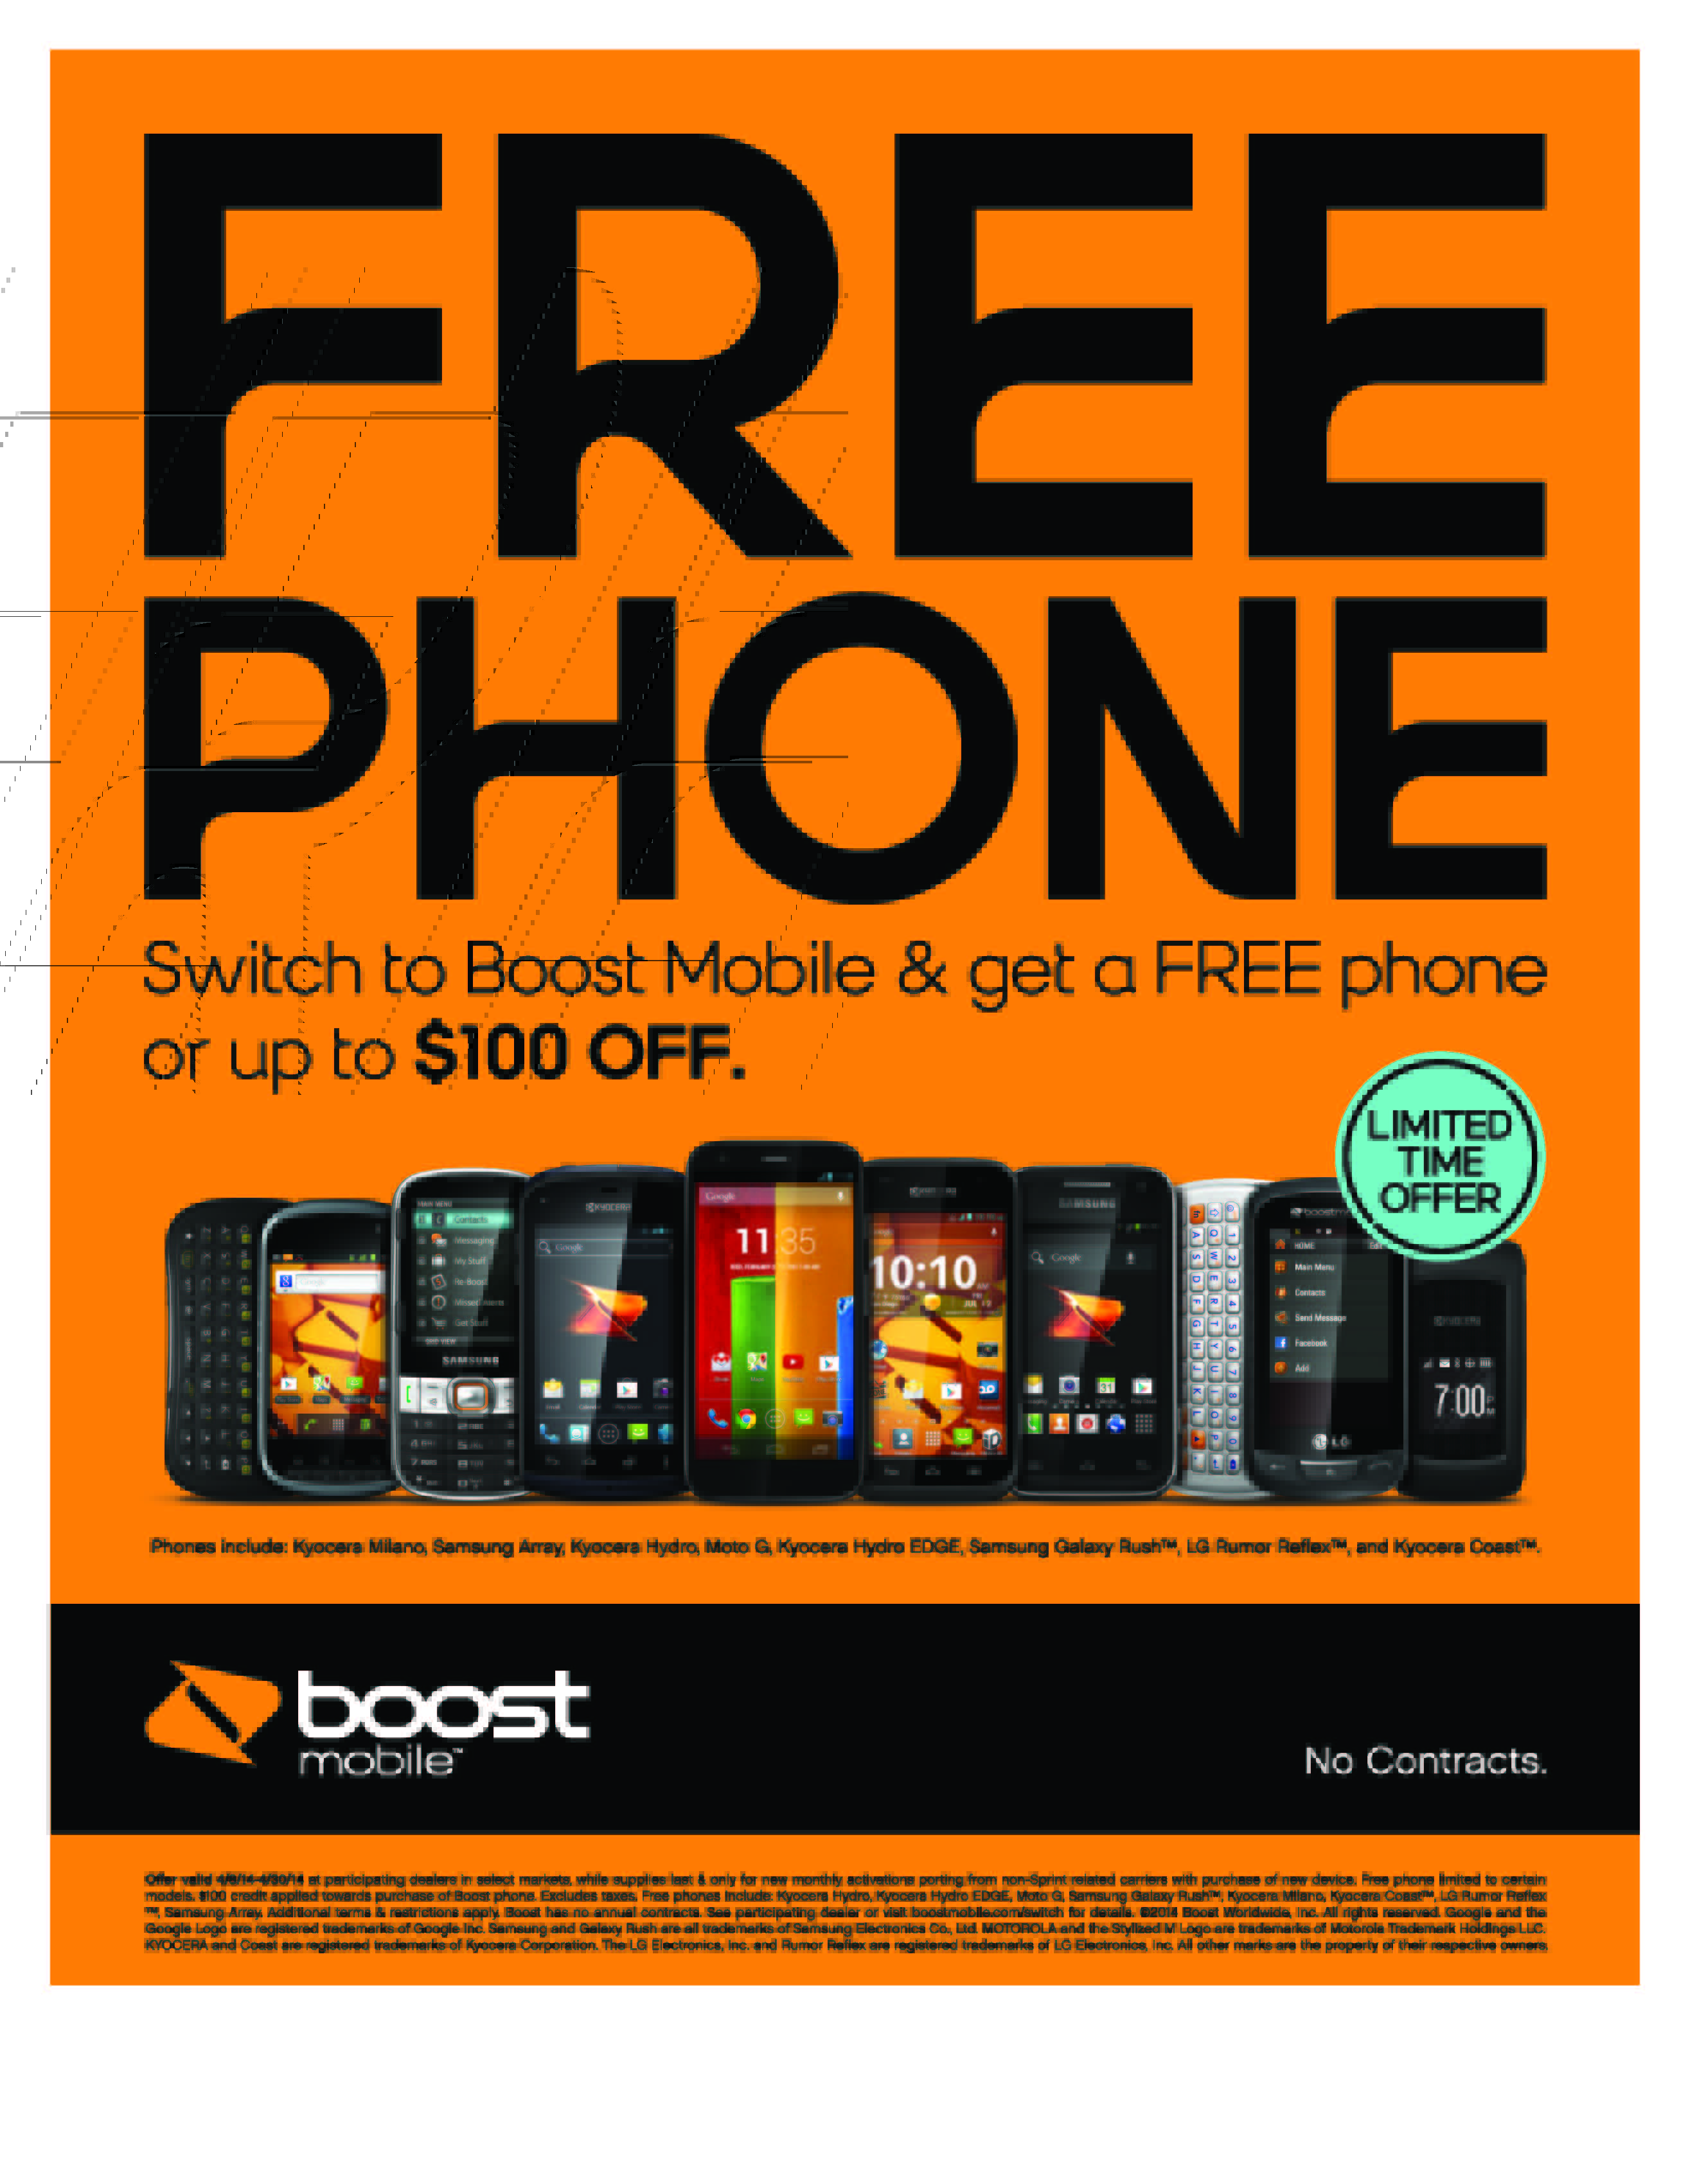 Switch to Boost Mobile & get a FREE phone or up to 100 OFF!